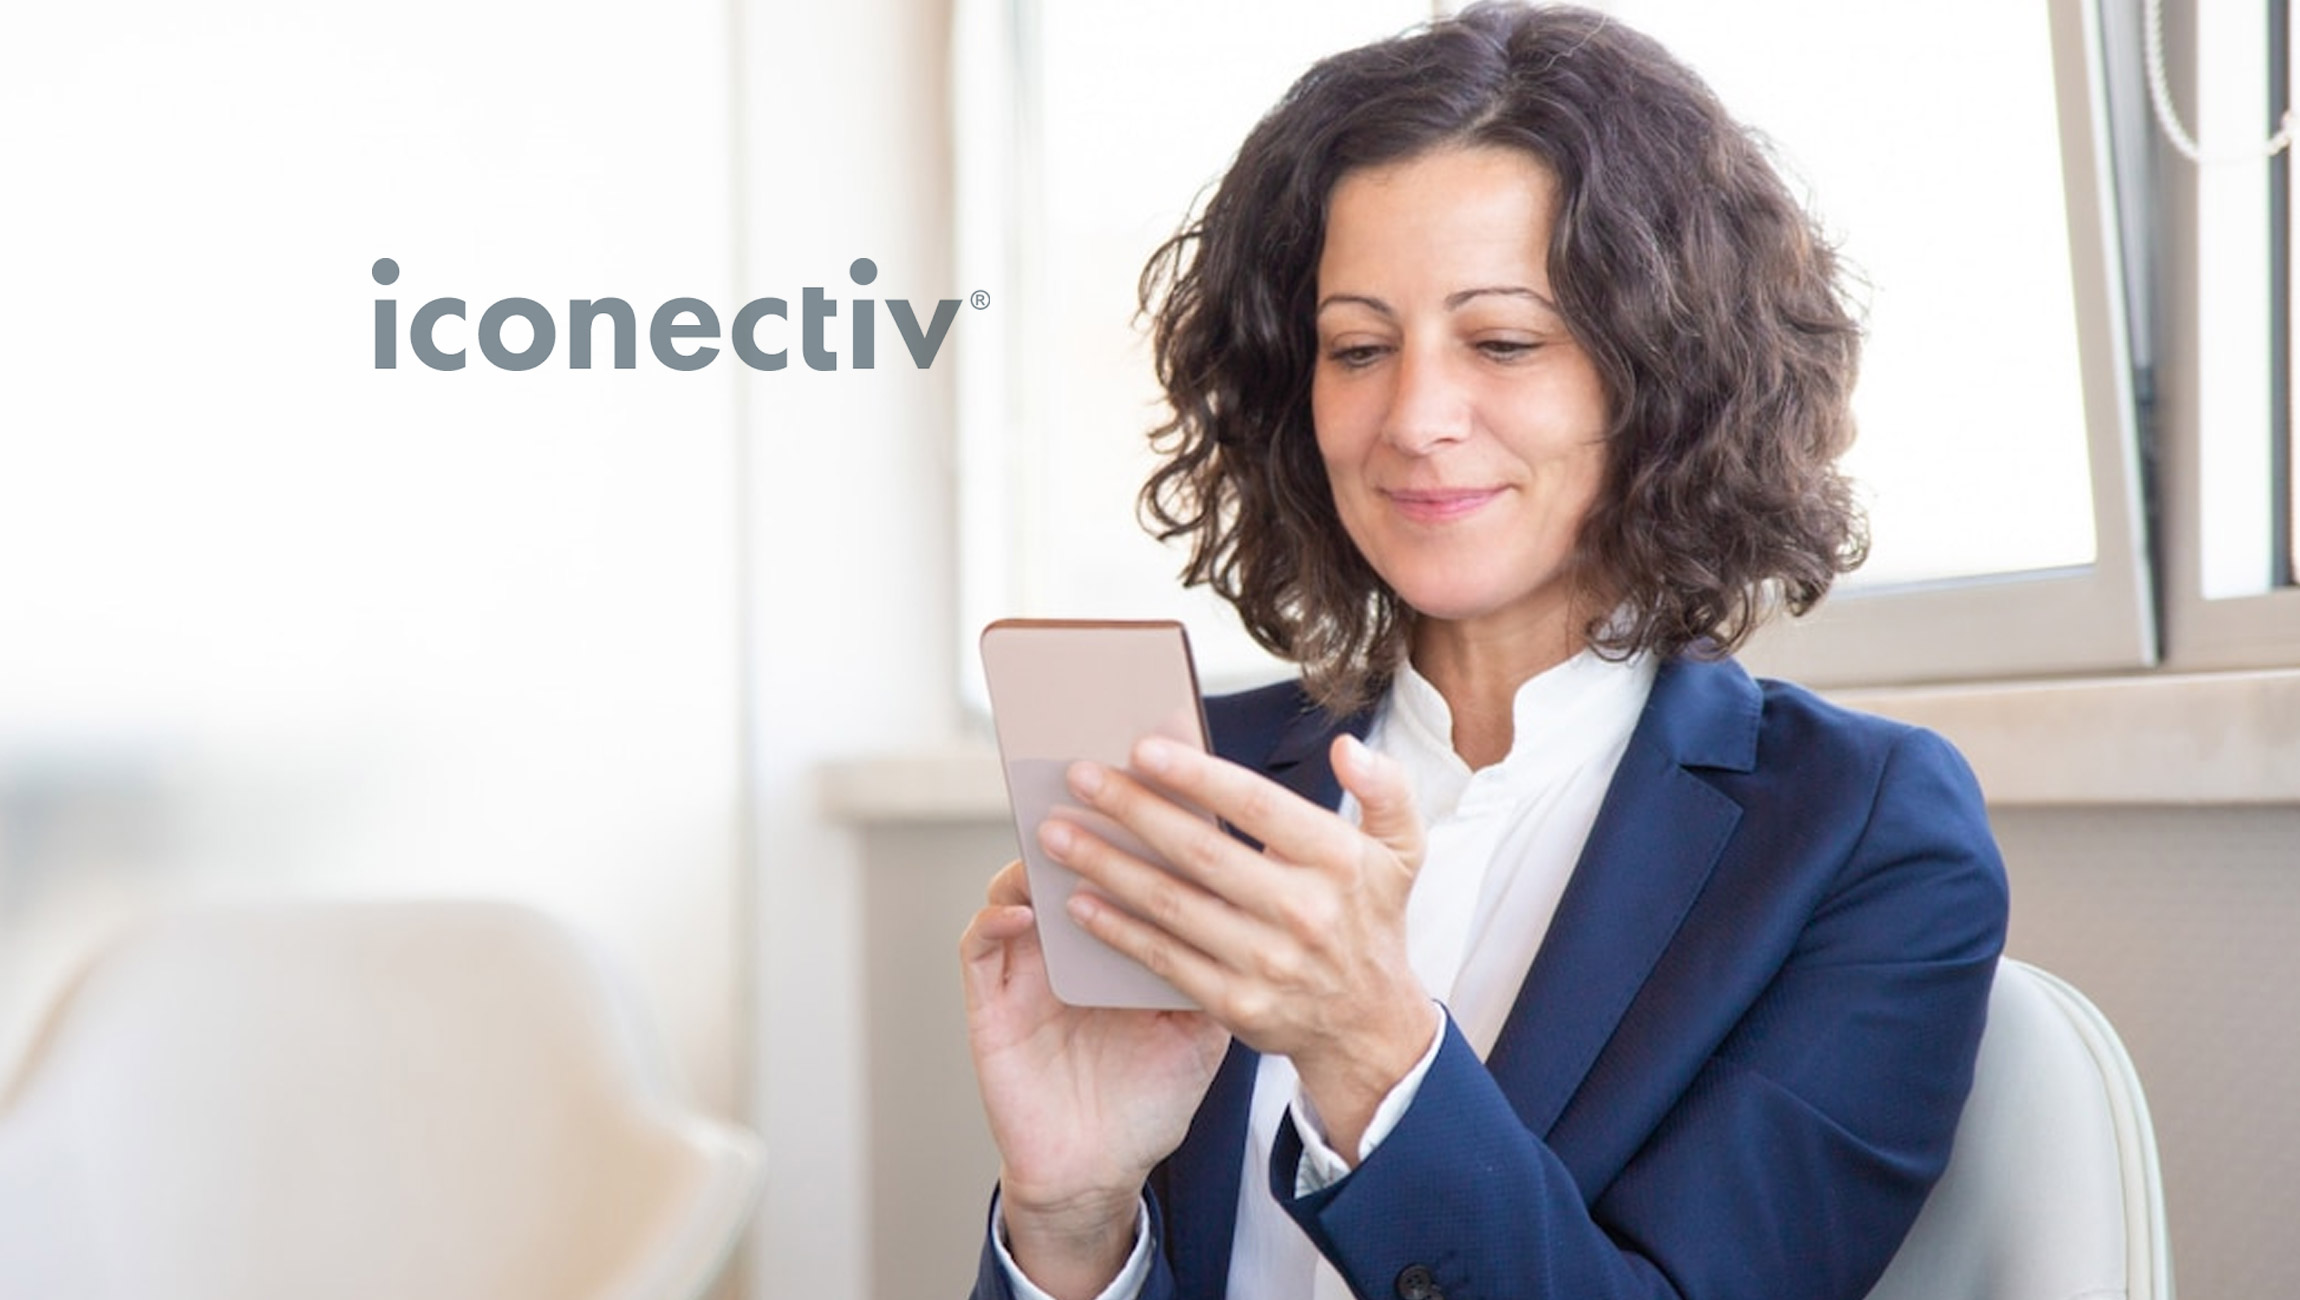 iconectiv Enables Fixed Number Portability in Argentina